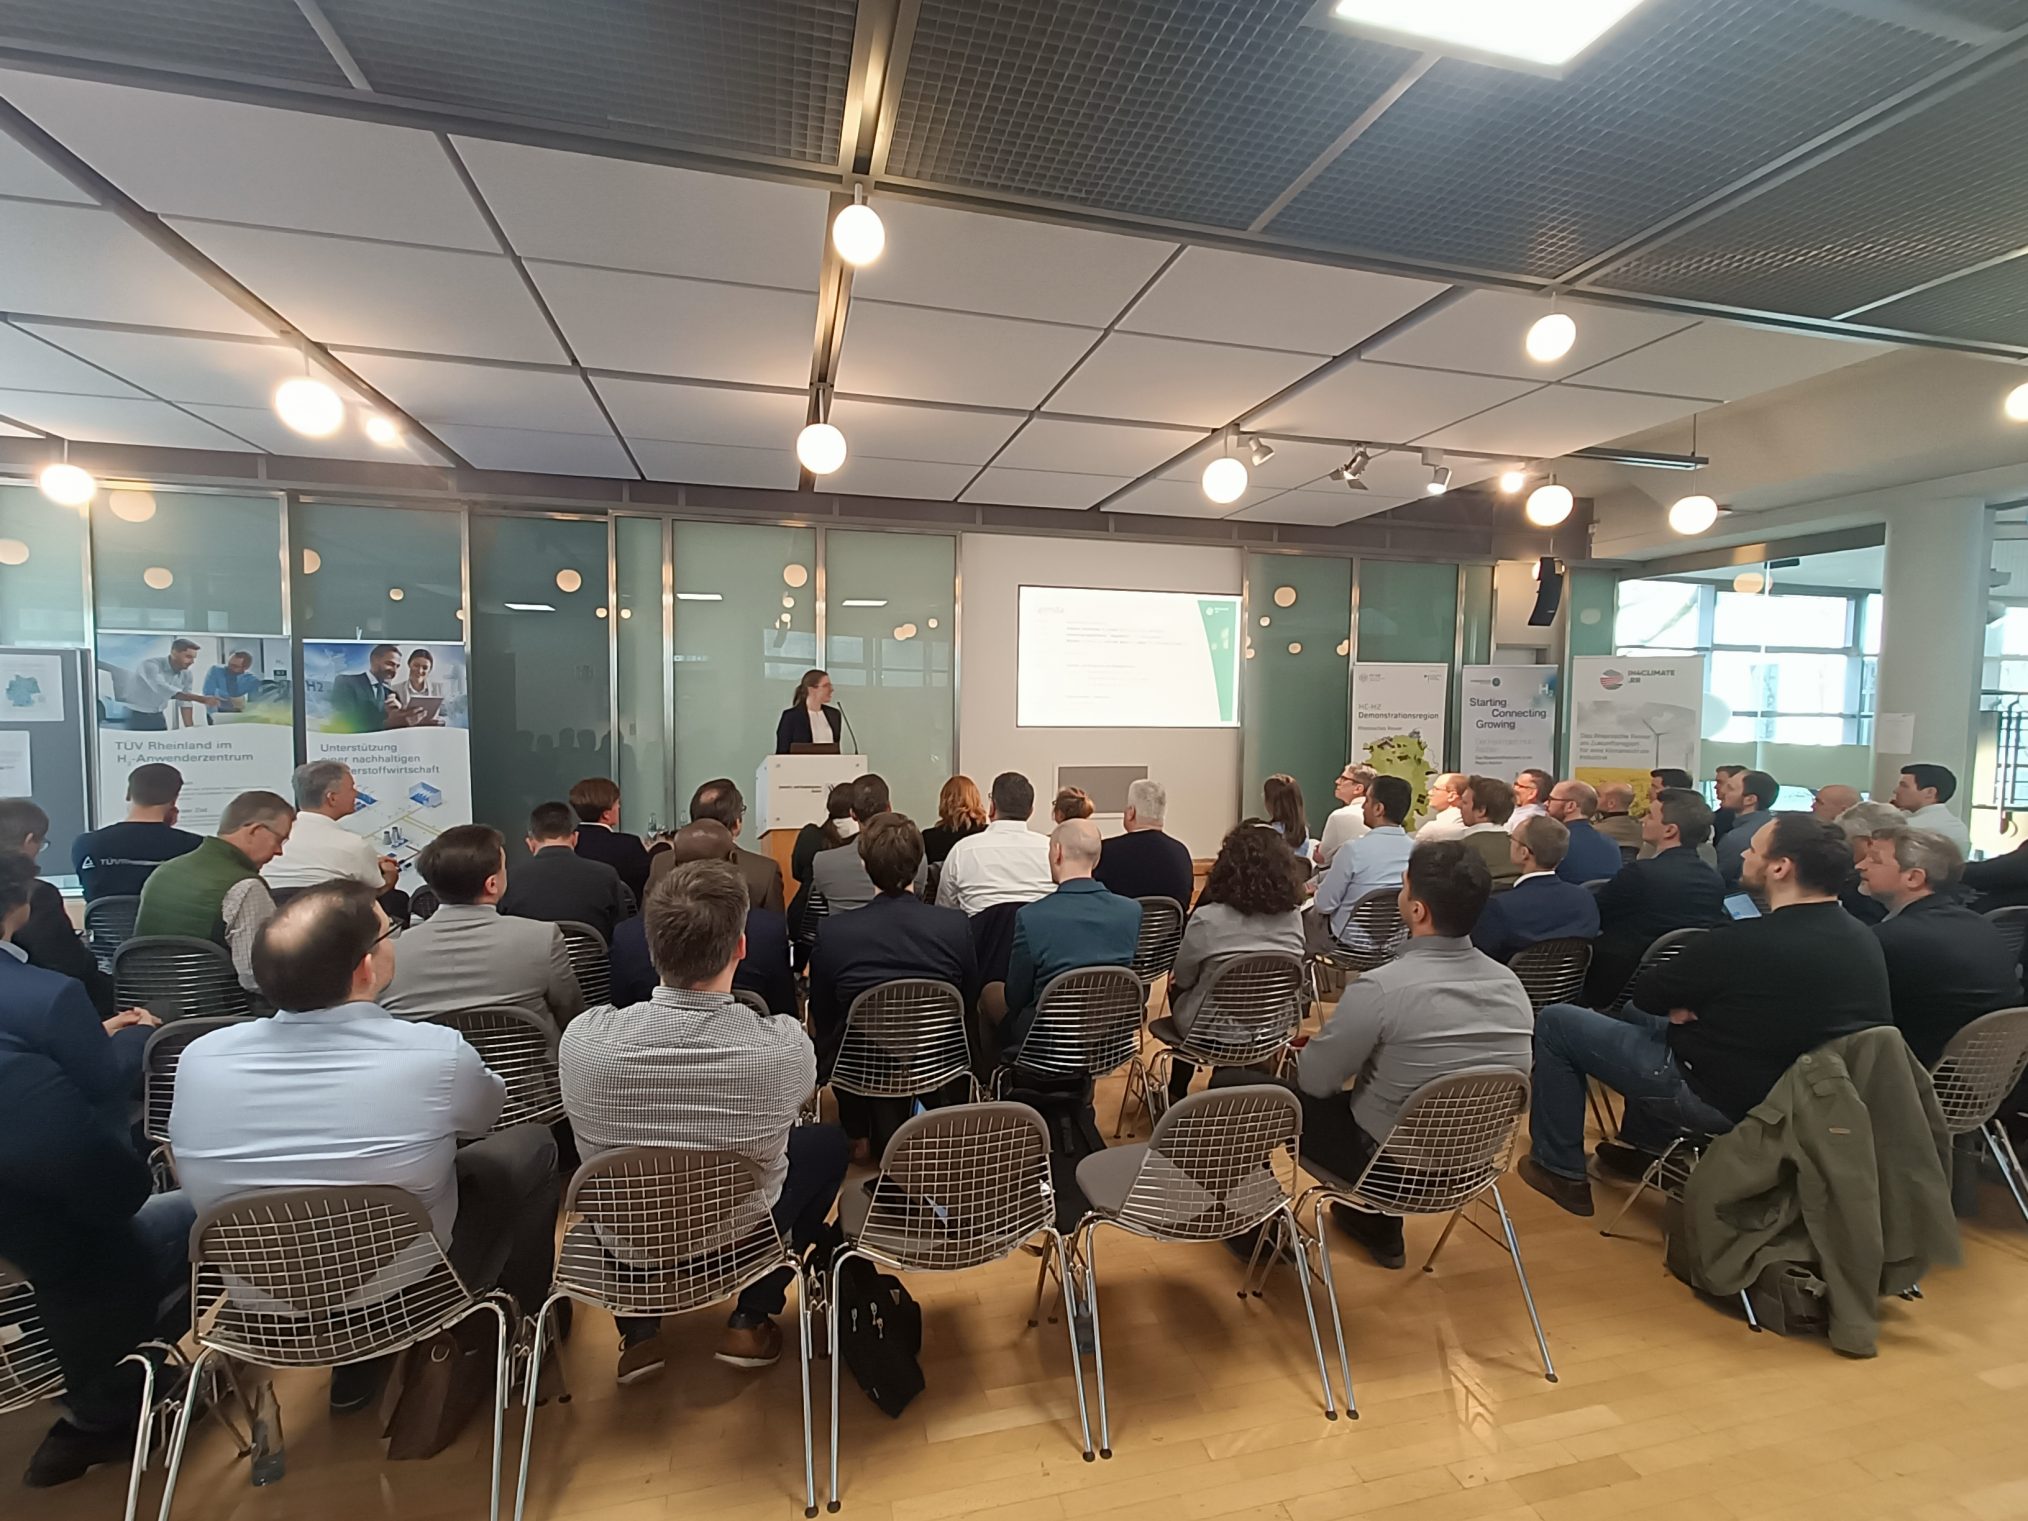 Workshop on “Requirements and perspectives for decentralized H2-Clusters in the Rheinish Region”, Aachen